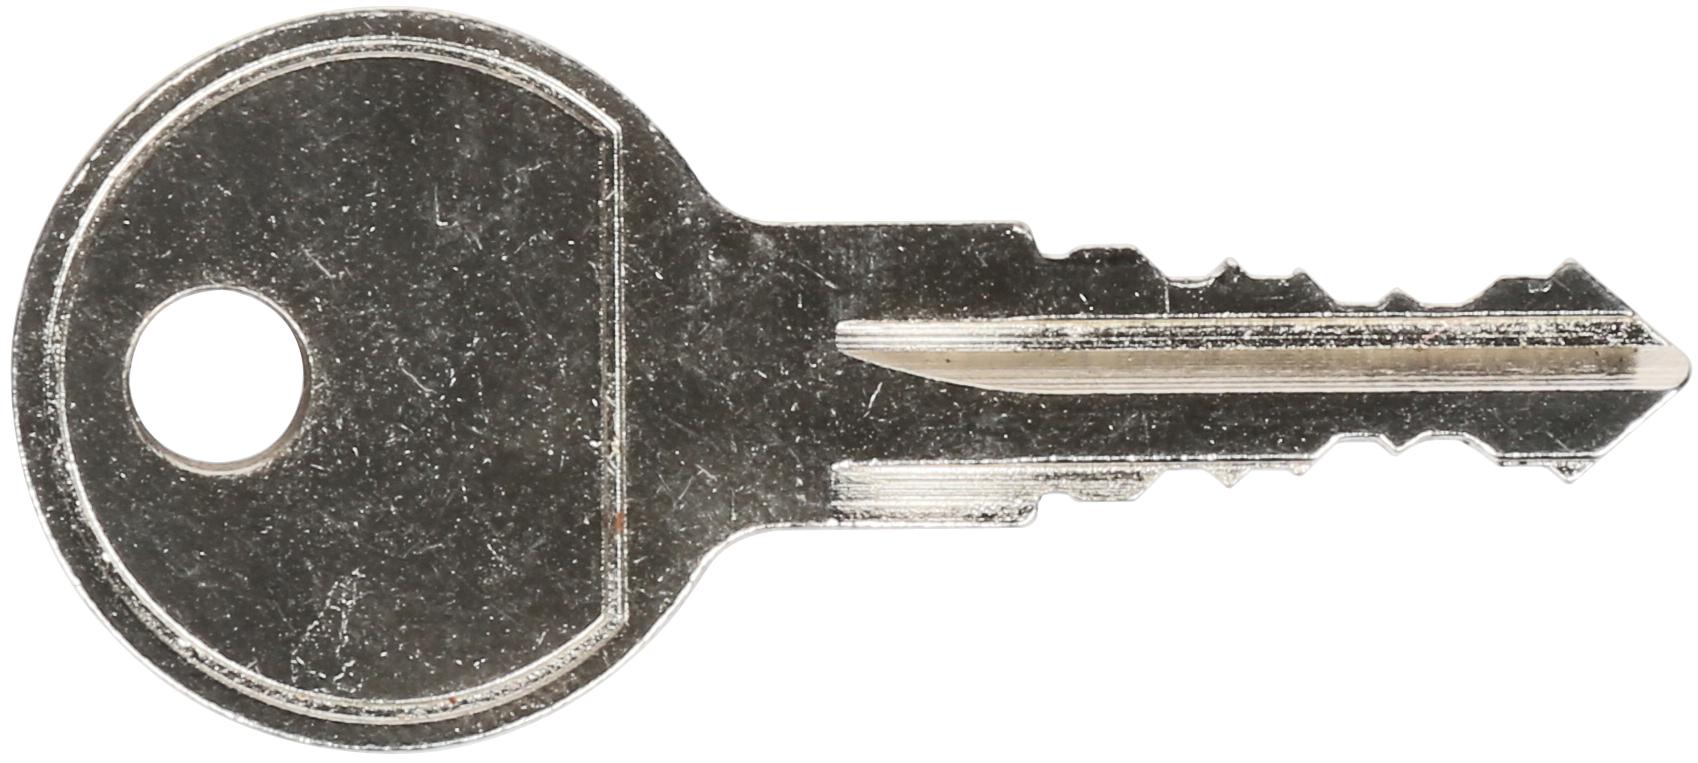 Spare Roof Box Key 167